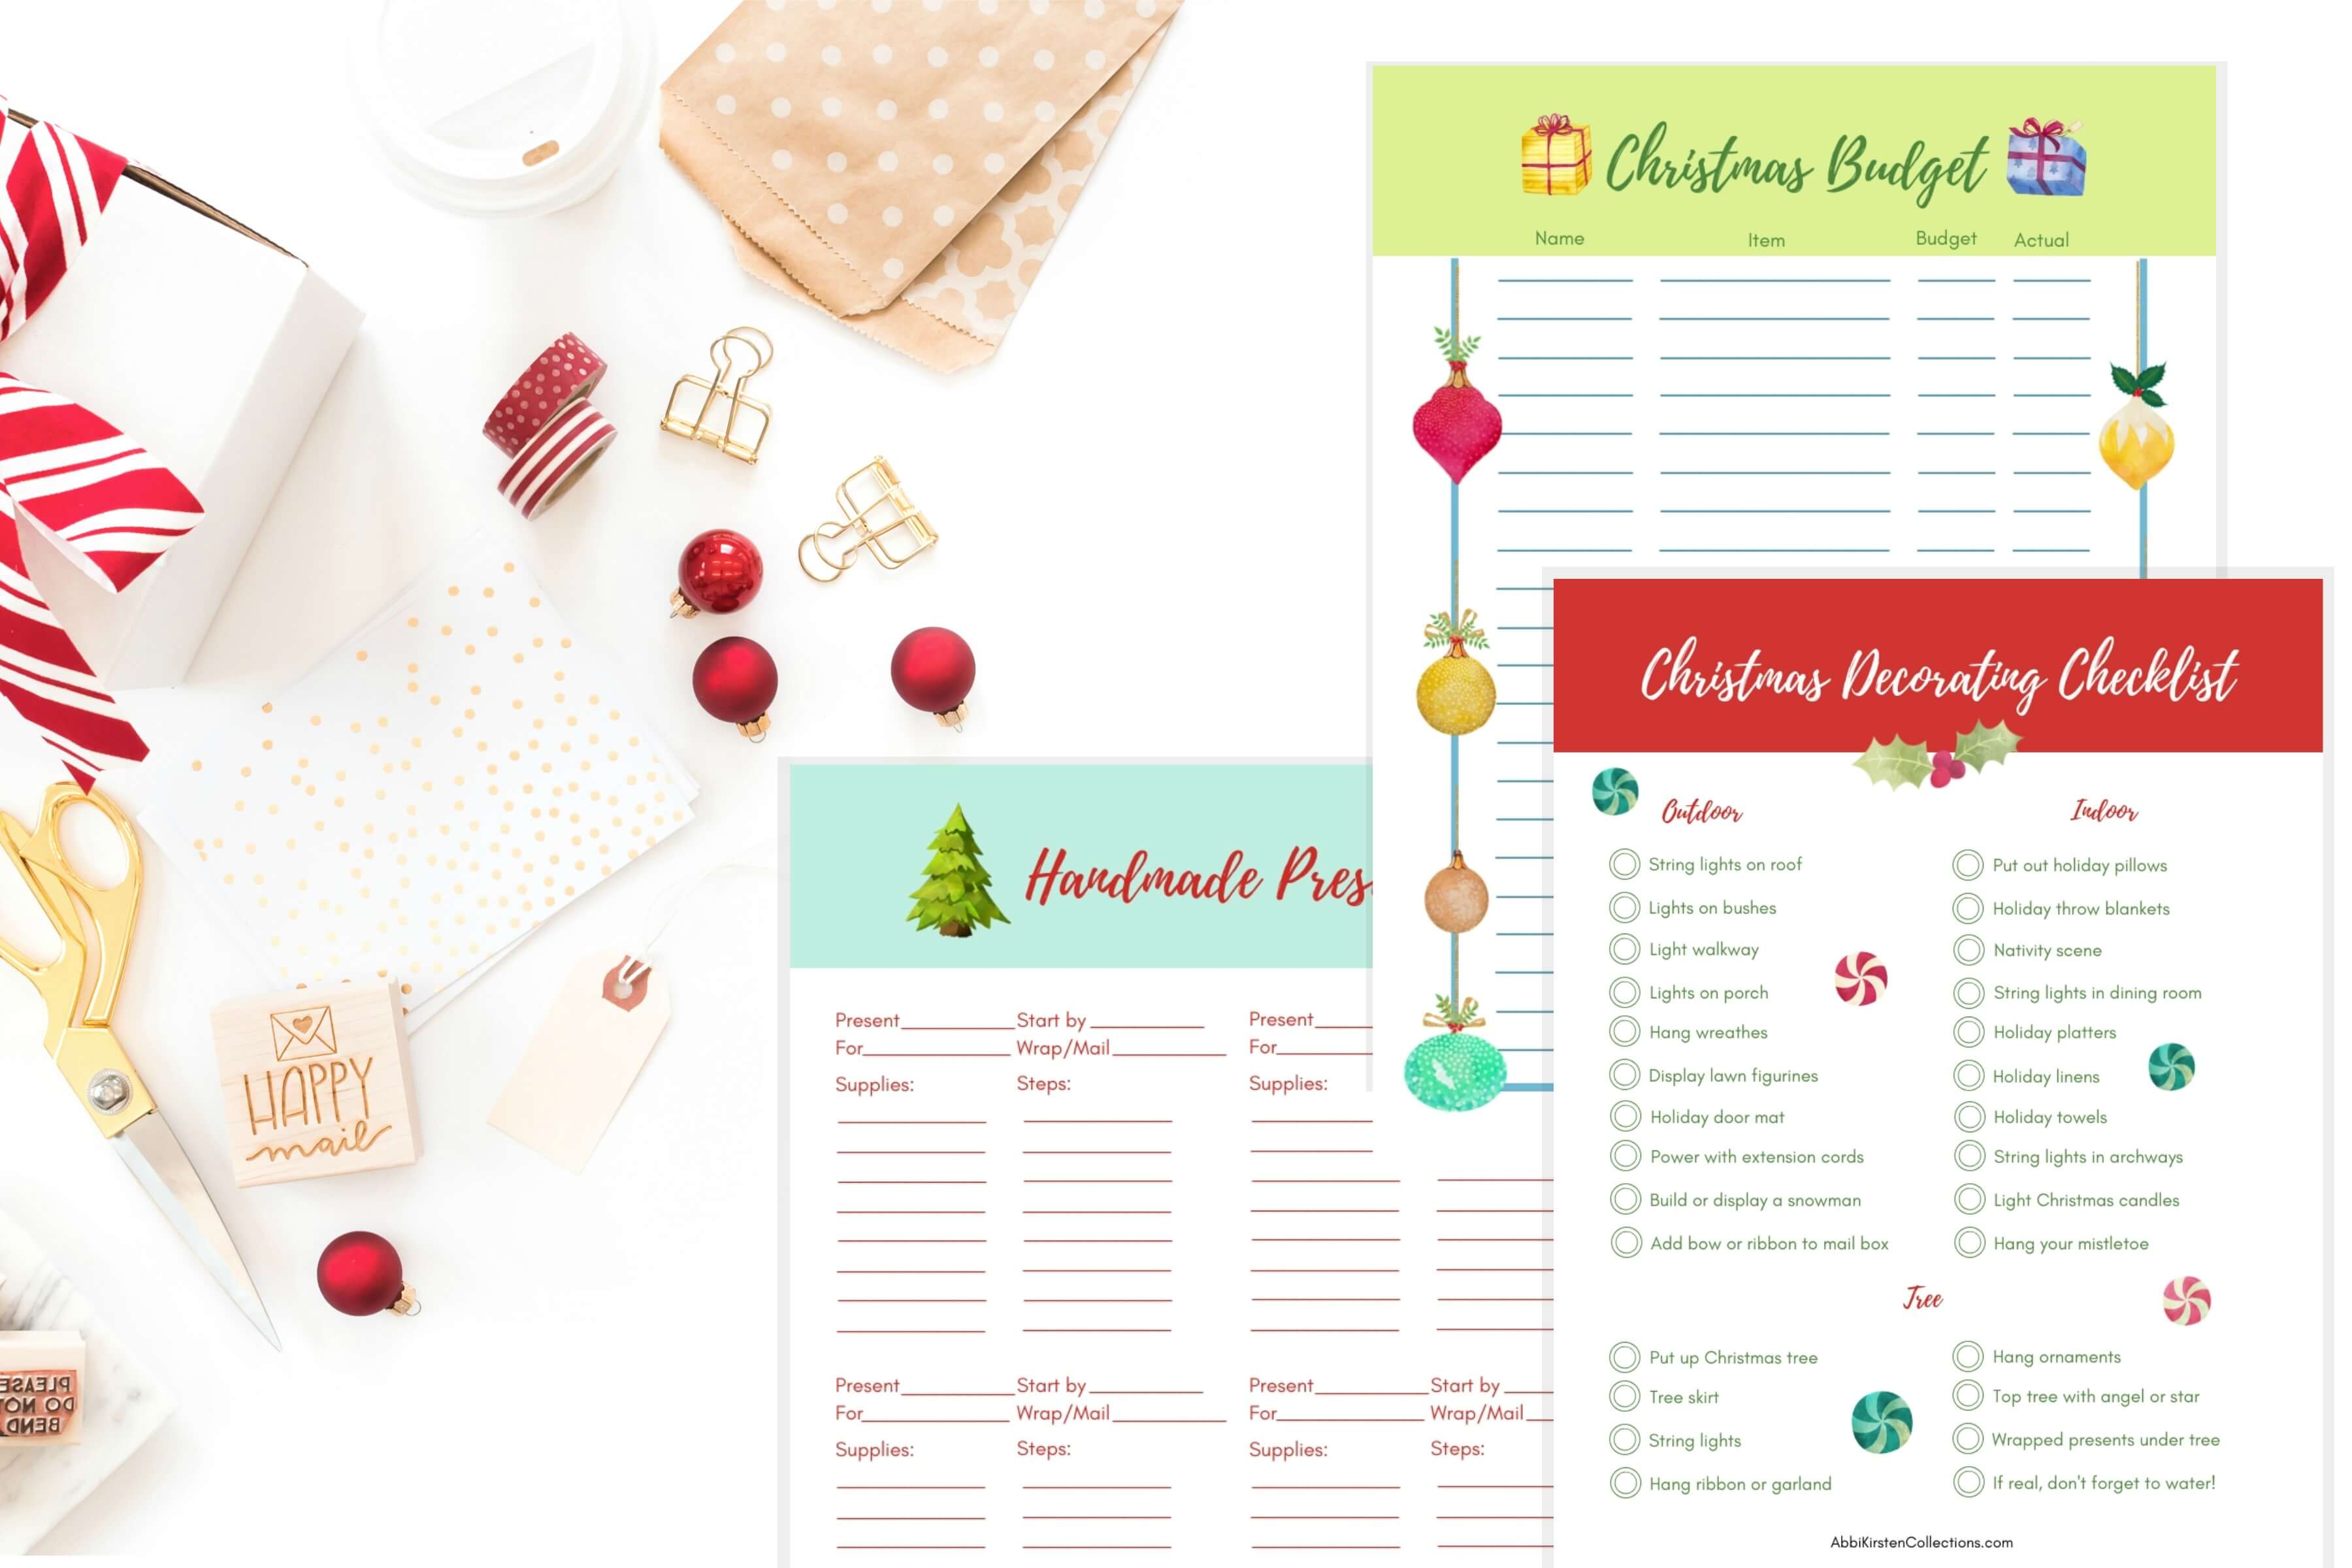 Christmas Holiday Planner: The Happier Holiday Printable Planner is everything you need to get organized and stay stress free this holiday season!